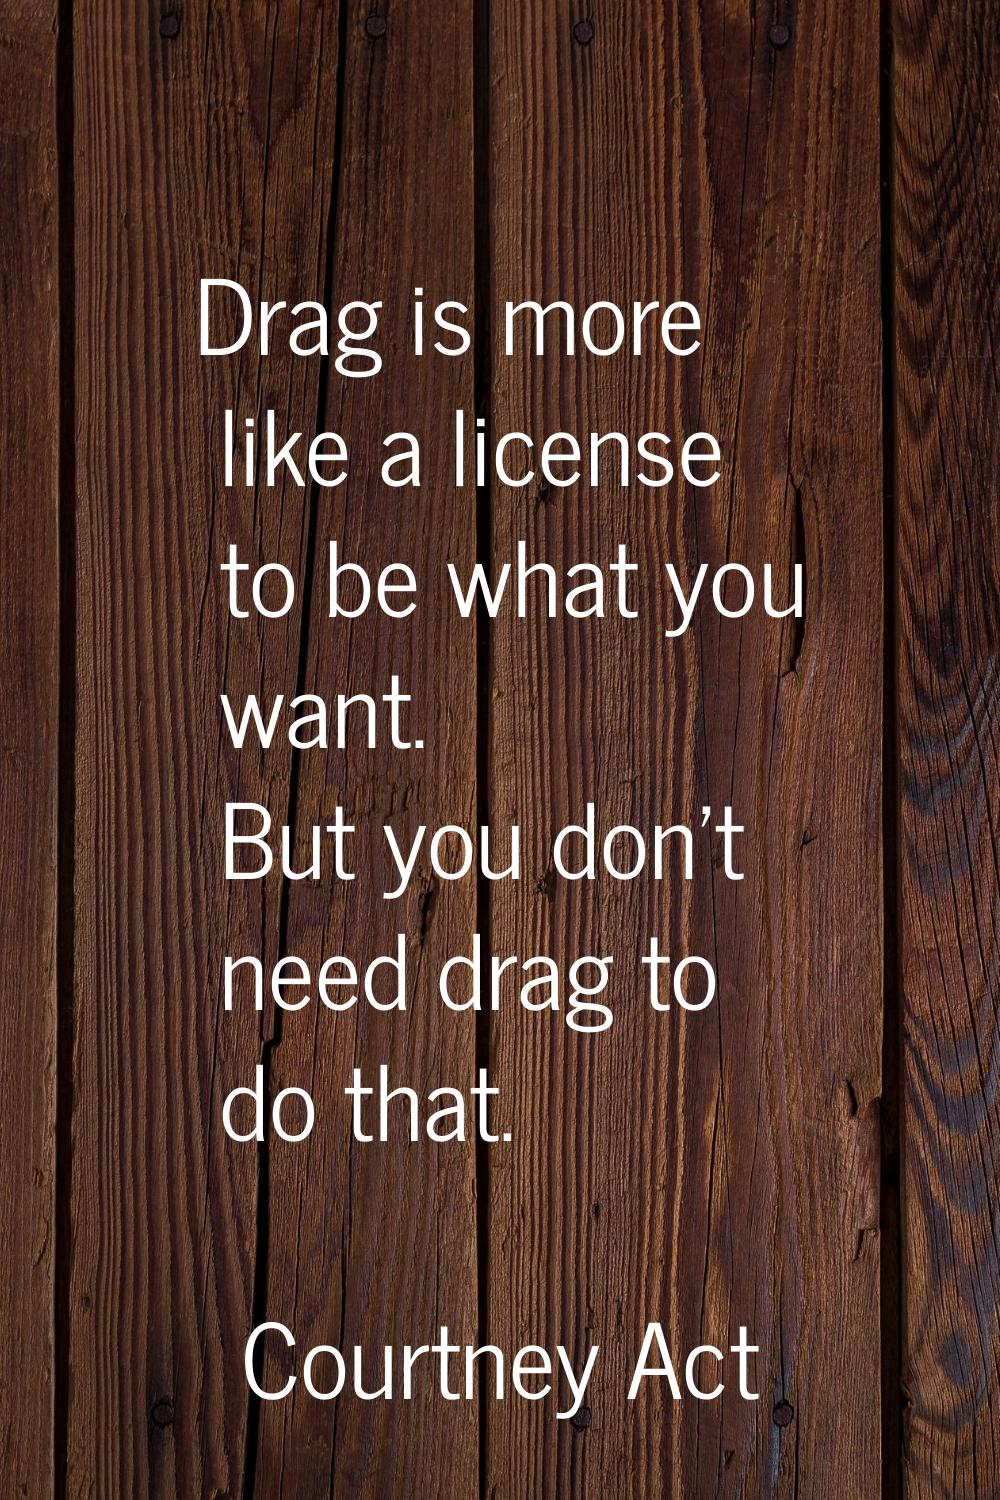 Drag is more like a license to be what you want. But you don't need drag to do that.